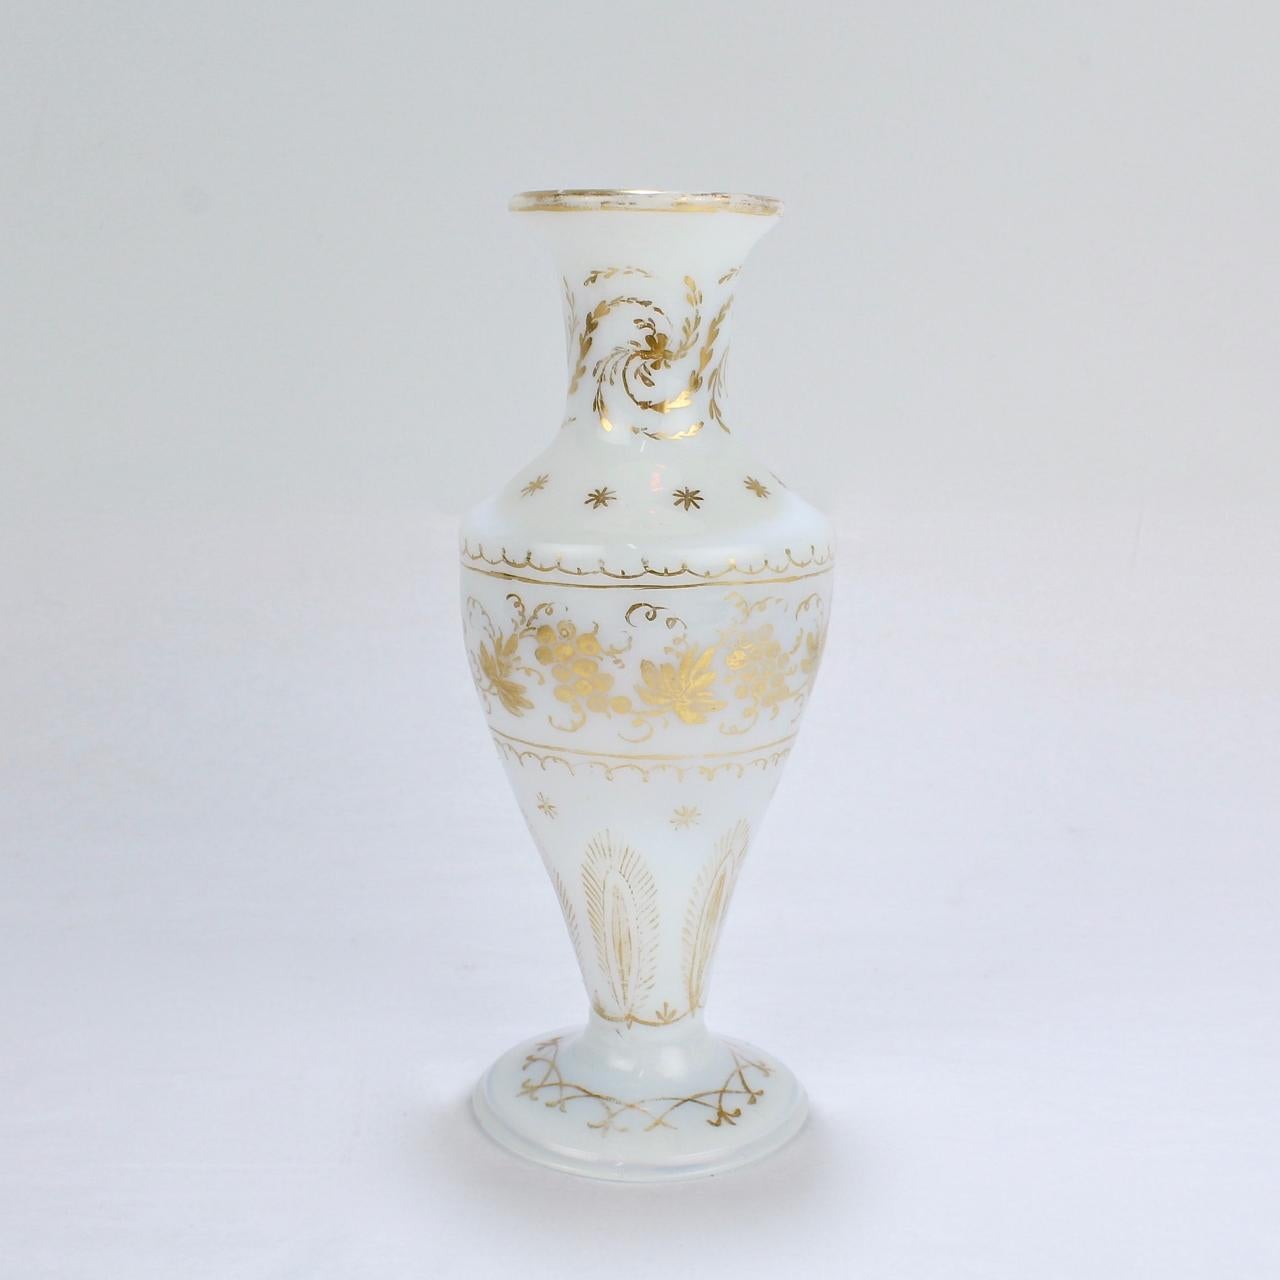 A fine and rare white, opaque glass vase decorated in the manner of James Giles.

English or possibly Continental in origin. (Bohemian or German Milchglas).

The base has rough pontil mark.

Height: ca. 7 1/4 in.

Items purchased from this